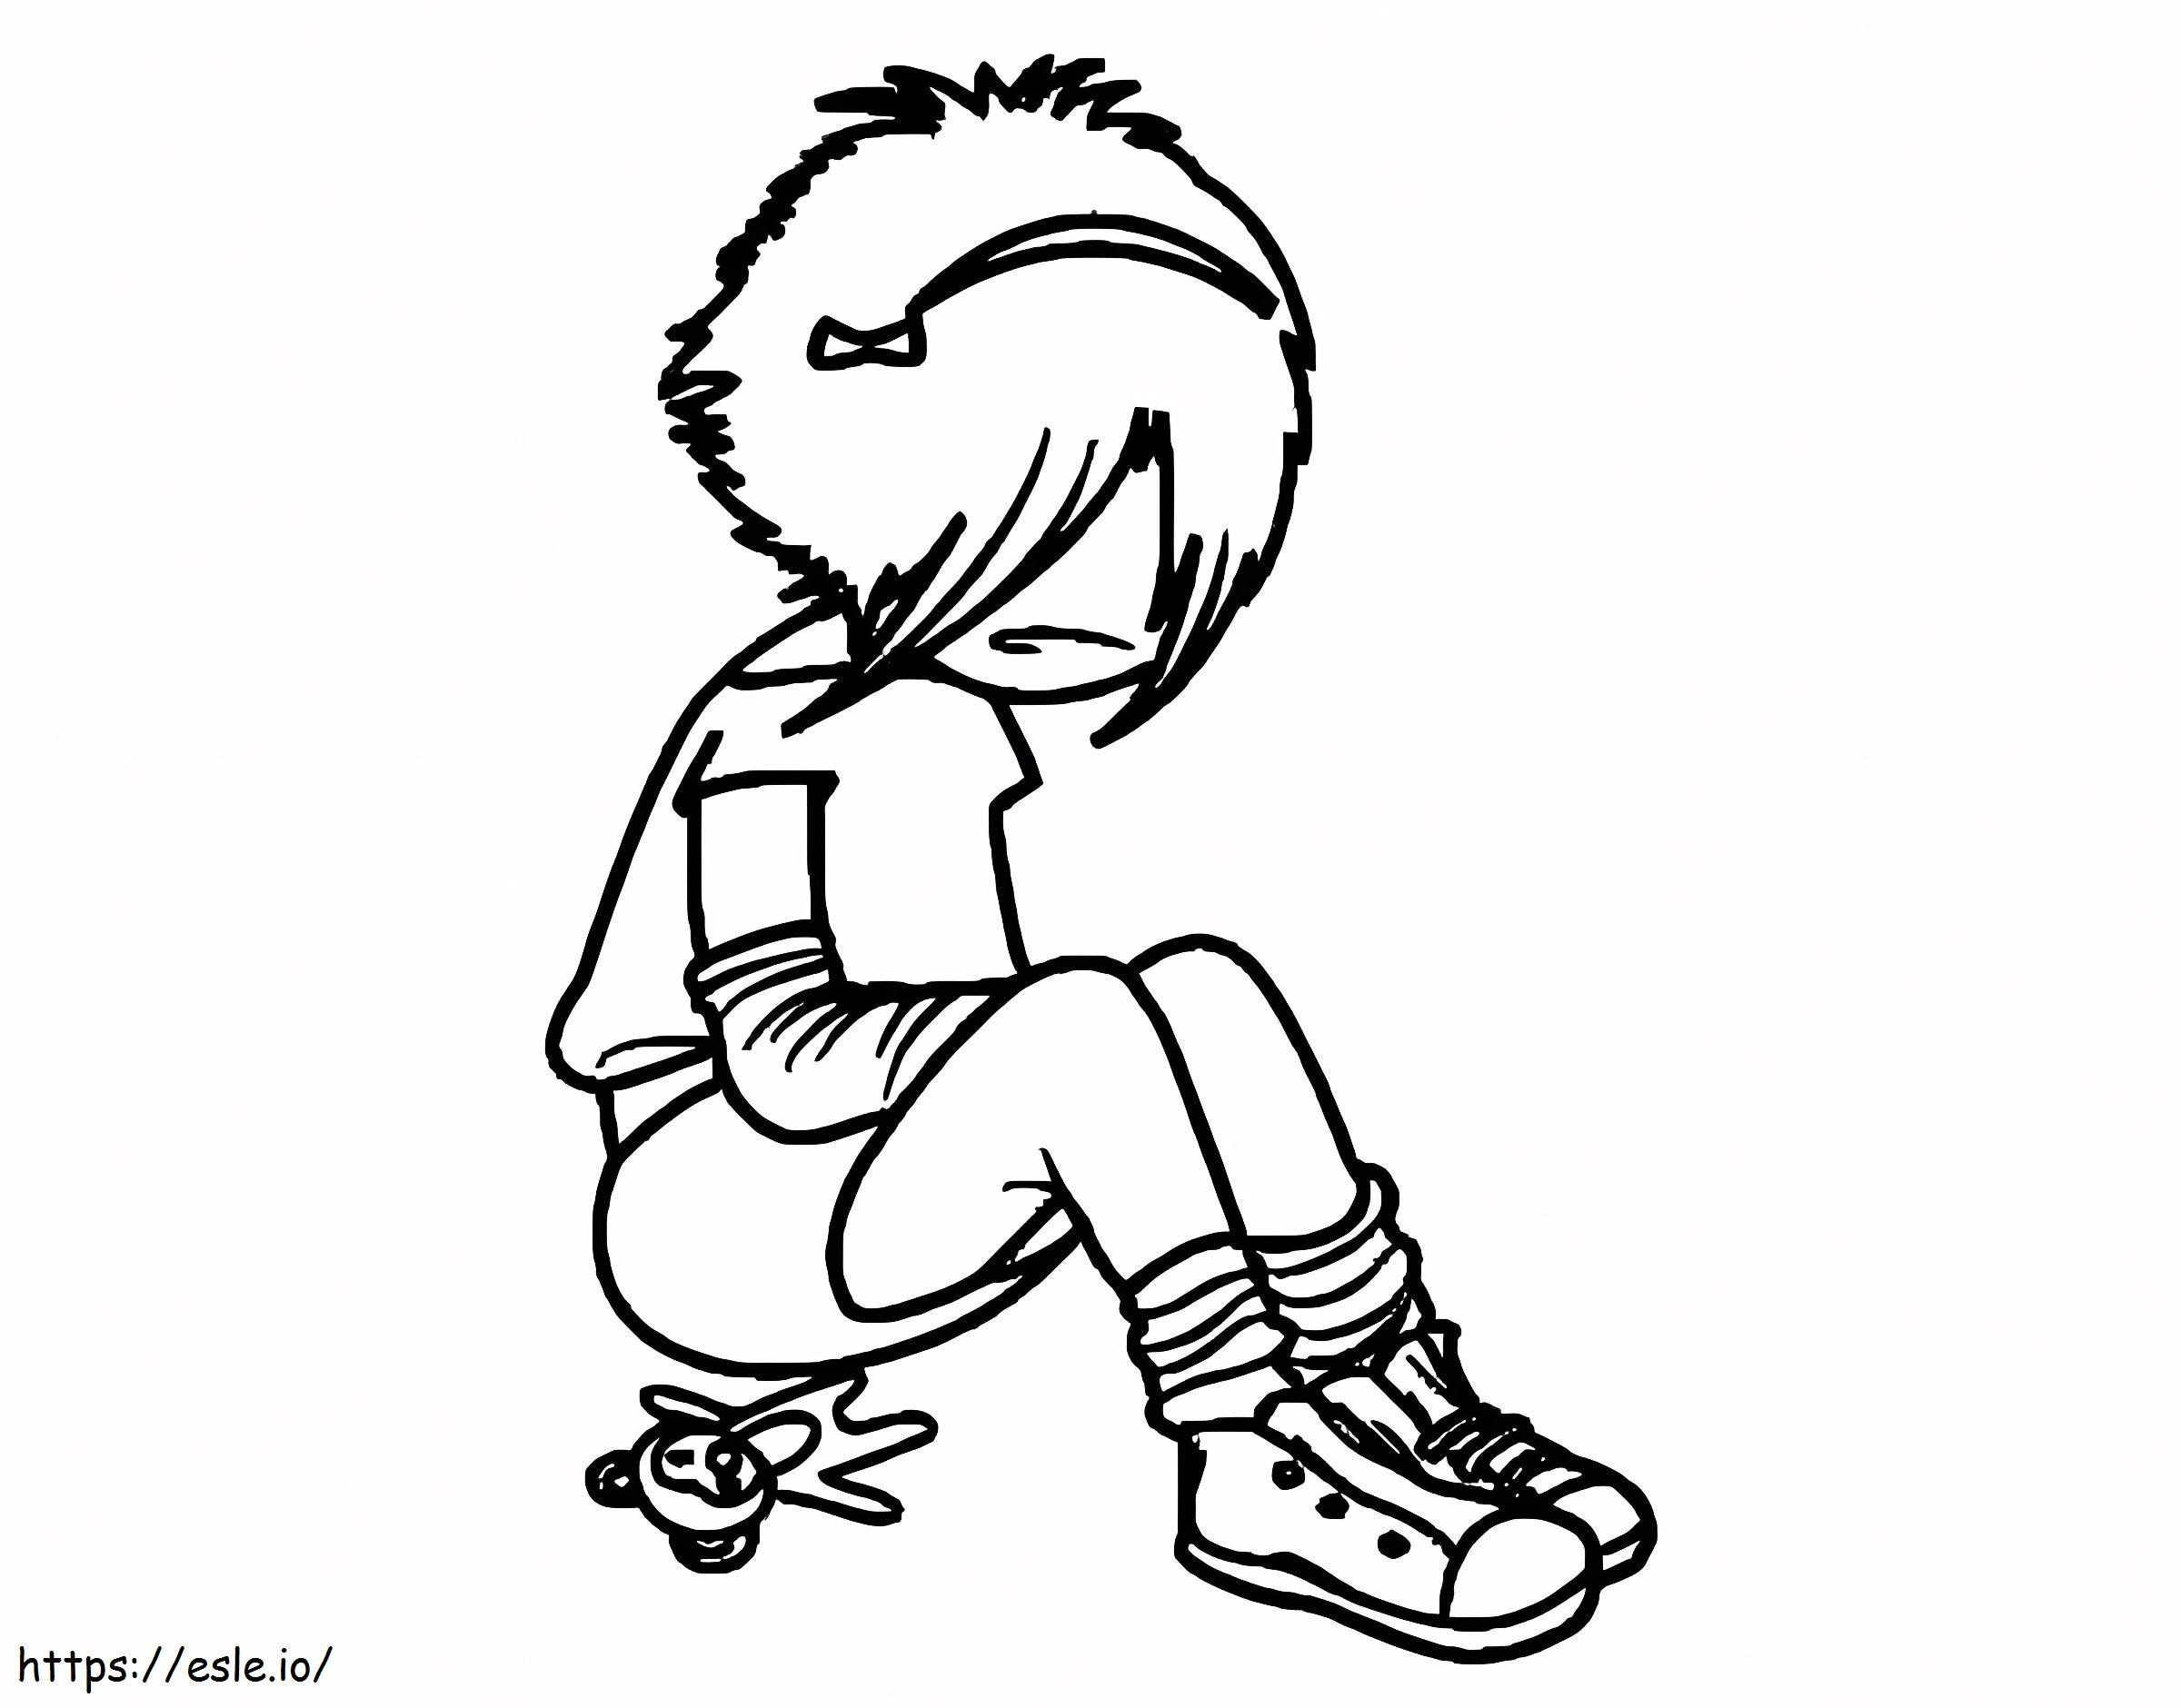 Emo Image coloring page